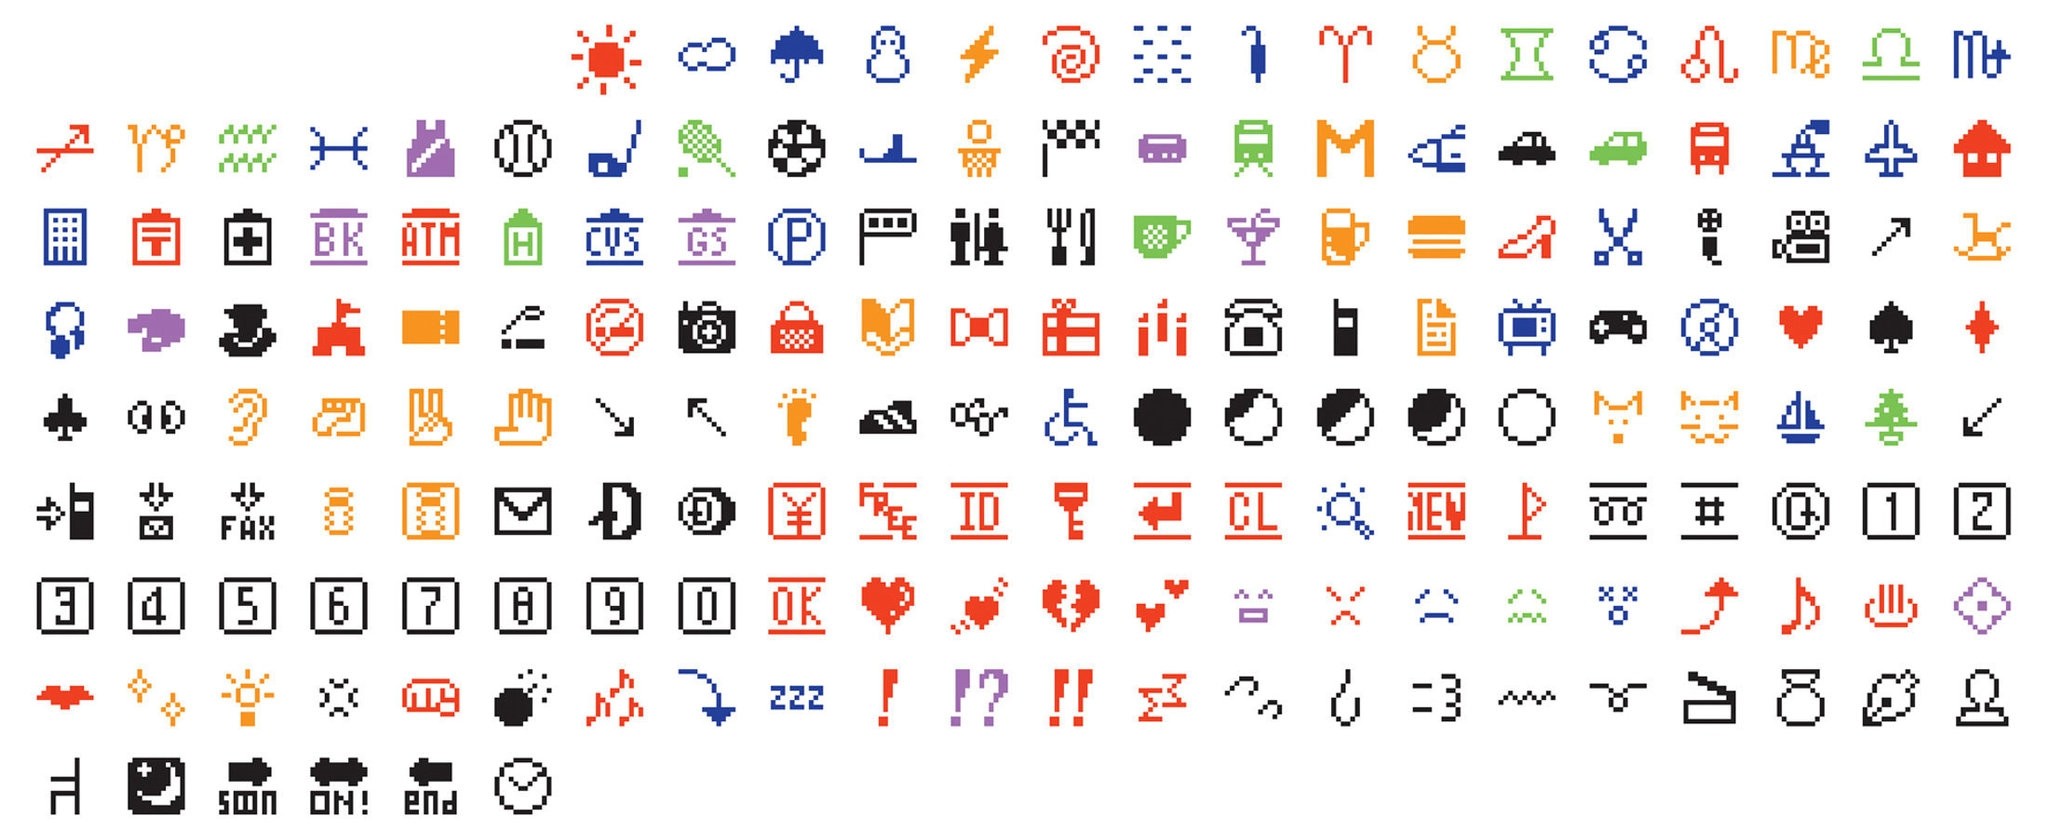 The set of 176 original emoji characters which have been donated to the Museum of Modern Art in New York City are seen in an undated handout image. (REUTERS Photo)